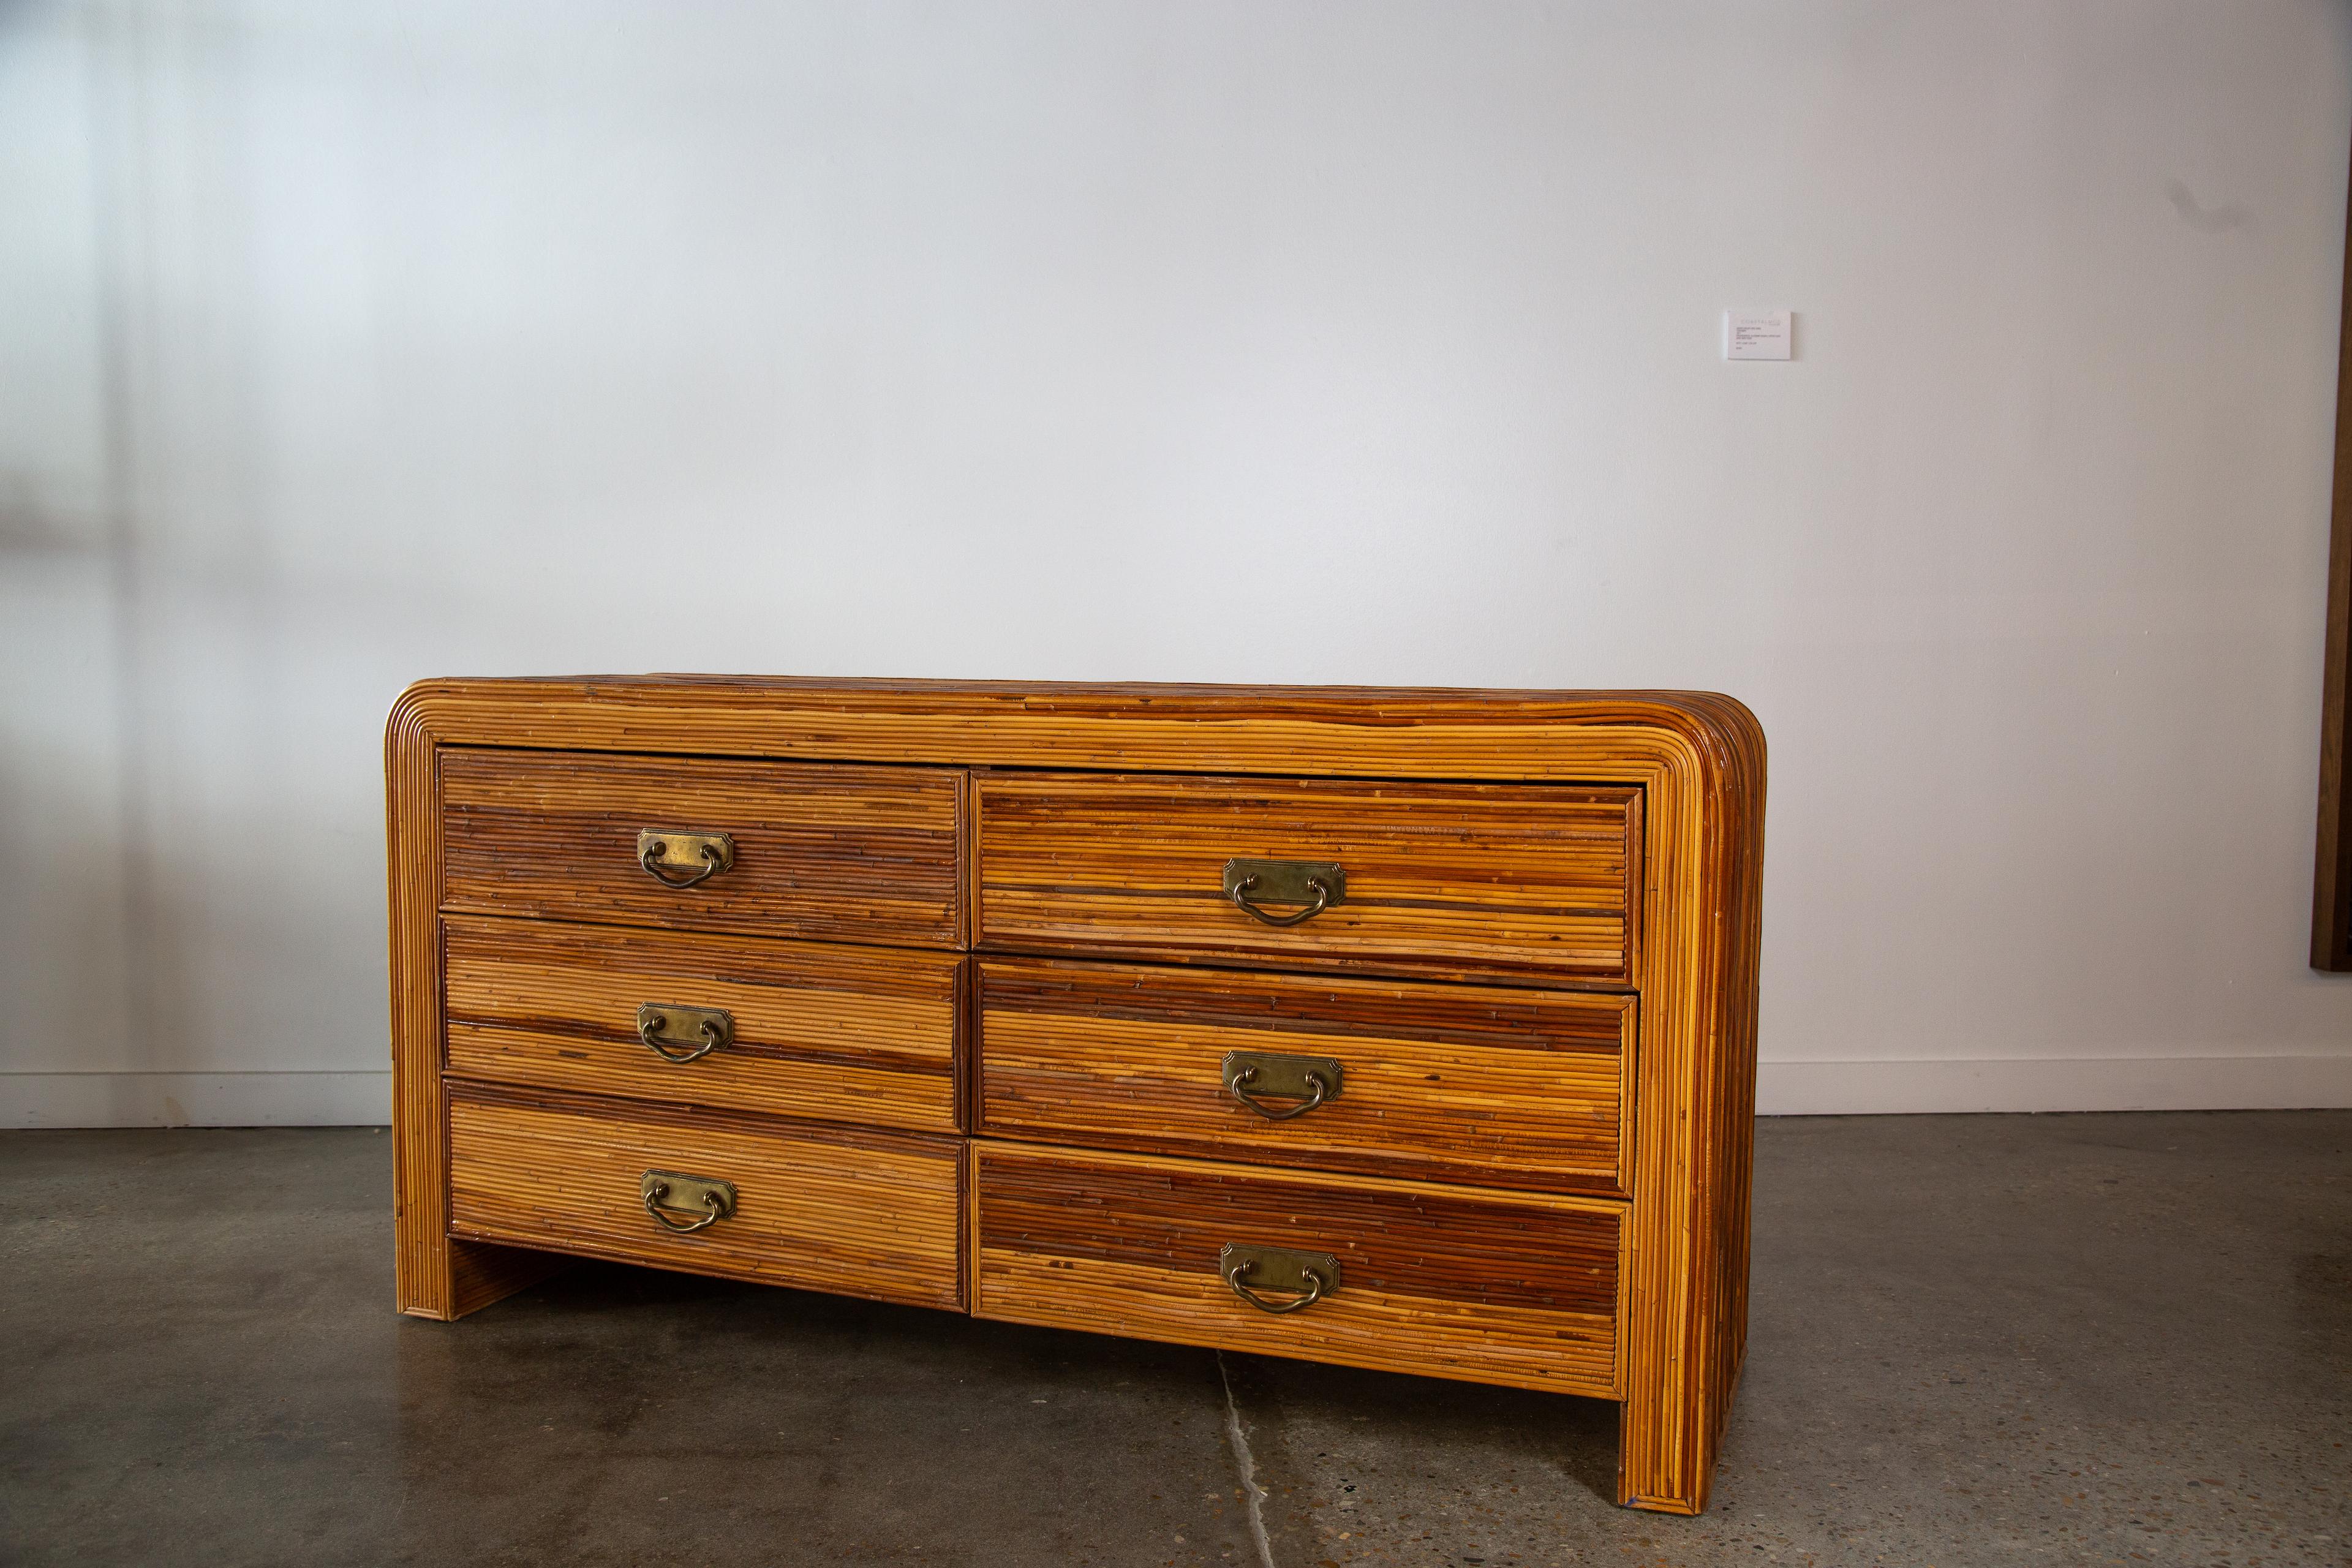 A beautiful 6 drawer dresser in split reed. The reed with different natural variations in color provides great movement and interest to a piece already enhanced with texture. 

Dimensions:60 5/8”W x 18 5/8” x 30 5/8”H

Condition:Good vintage